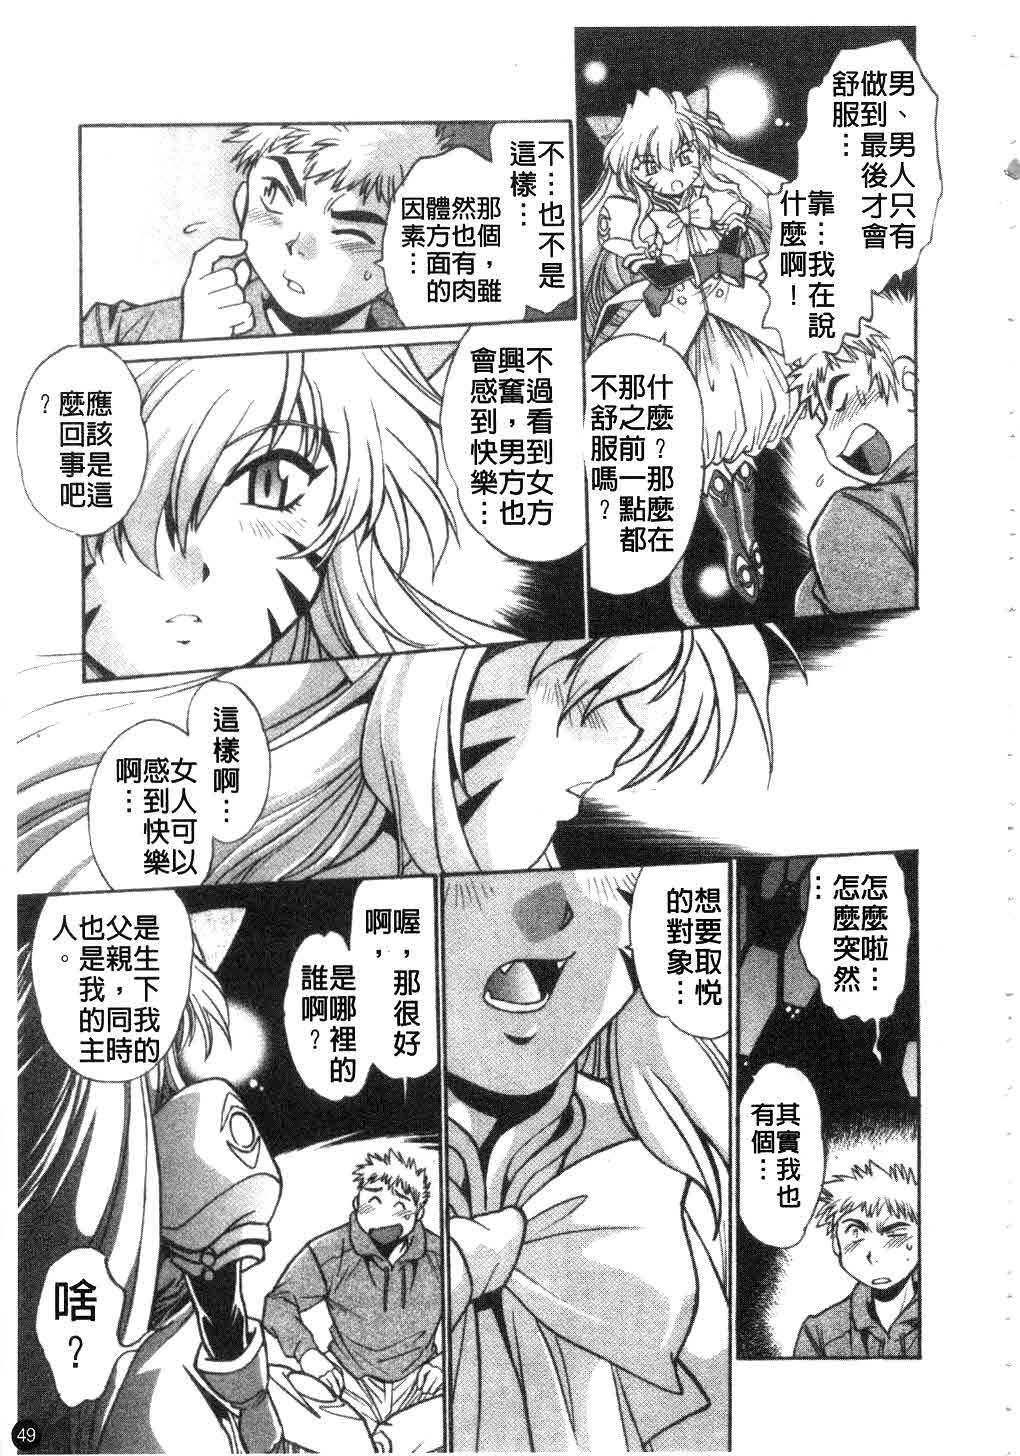 [Manabe Jouji] Tail Chaser 3 | 貓女迷情 3 [Chinese] page 50 full